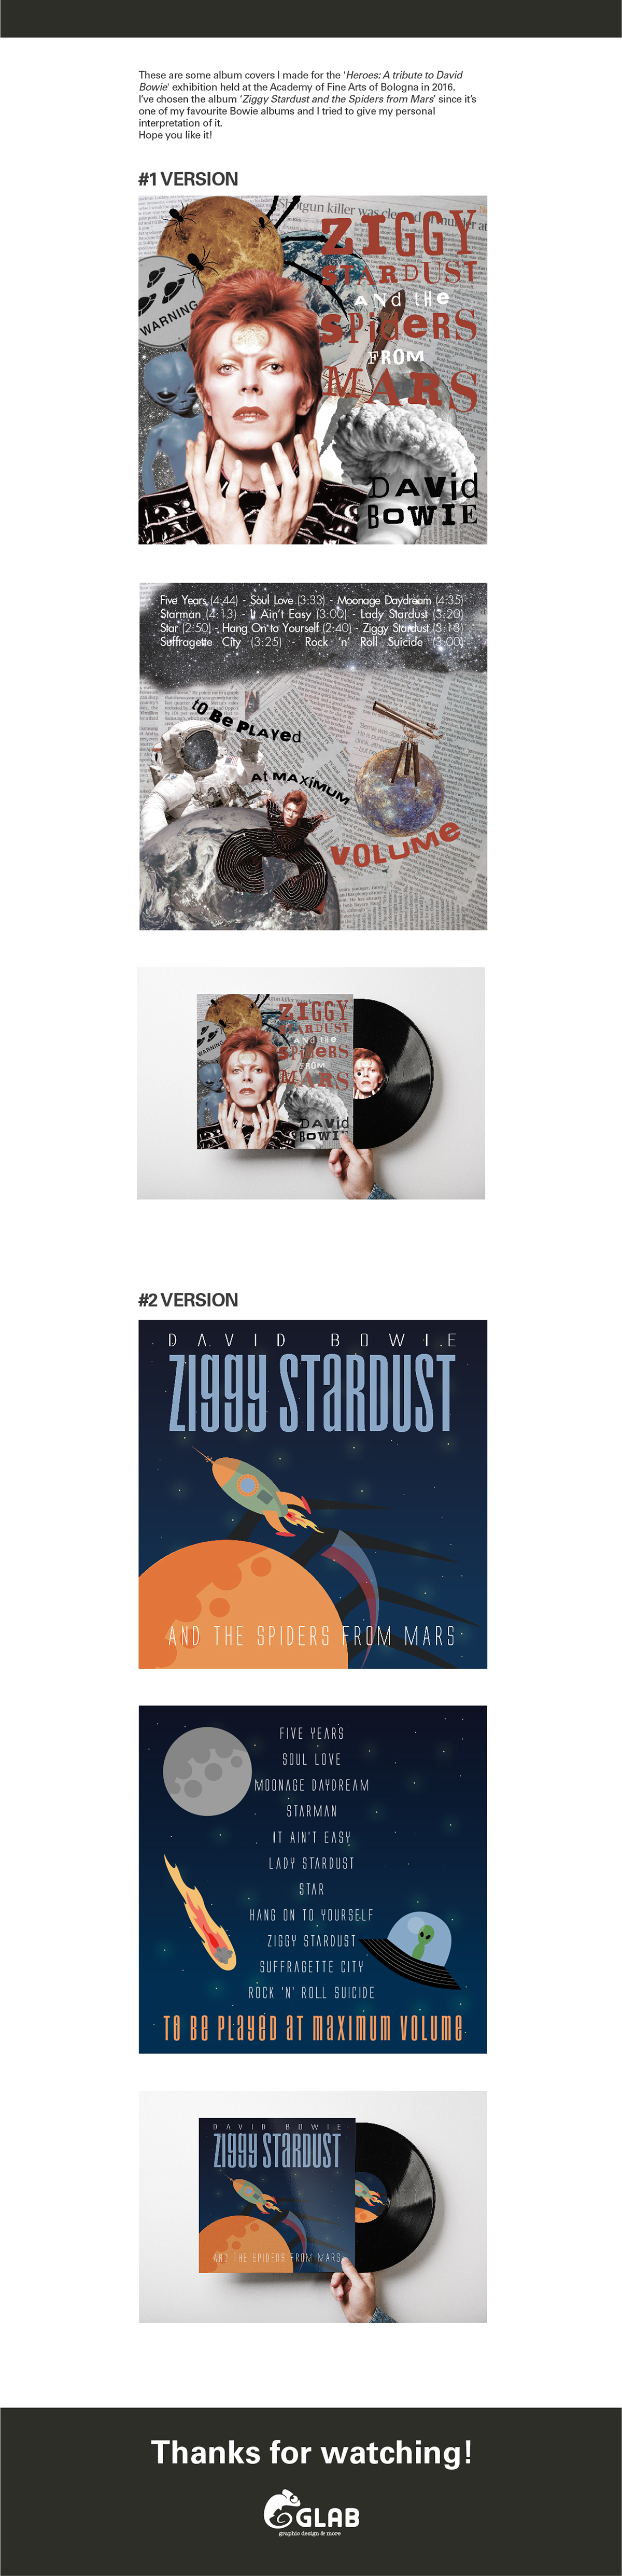 david bowie album cover Ziggy Stardust music dadaism Space  graphic design  ILLUSTRATION  spiders from mars MUSIC RECORD